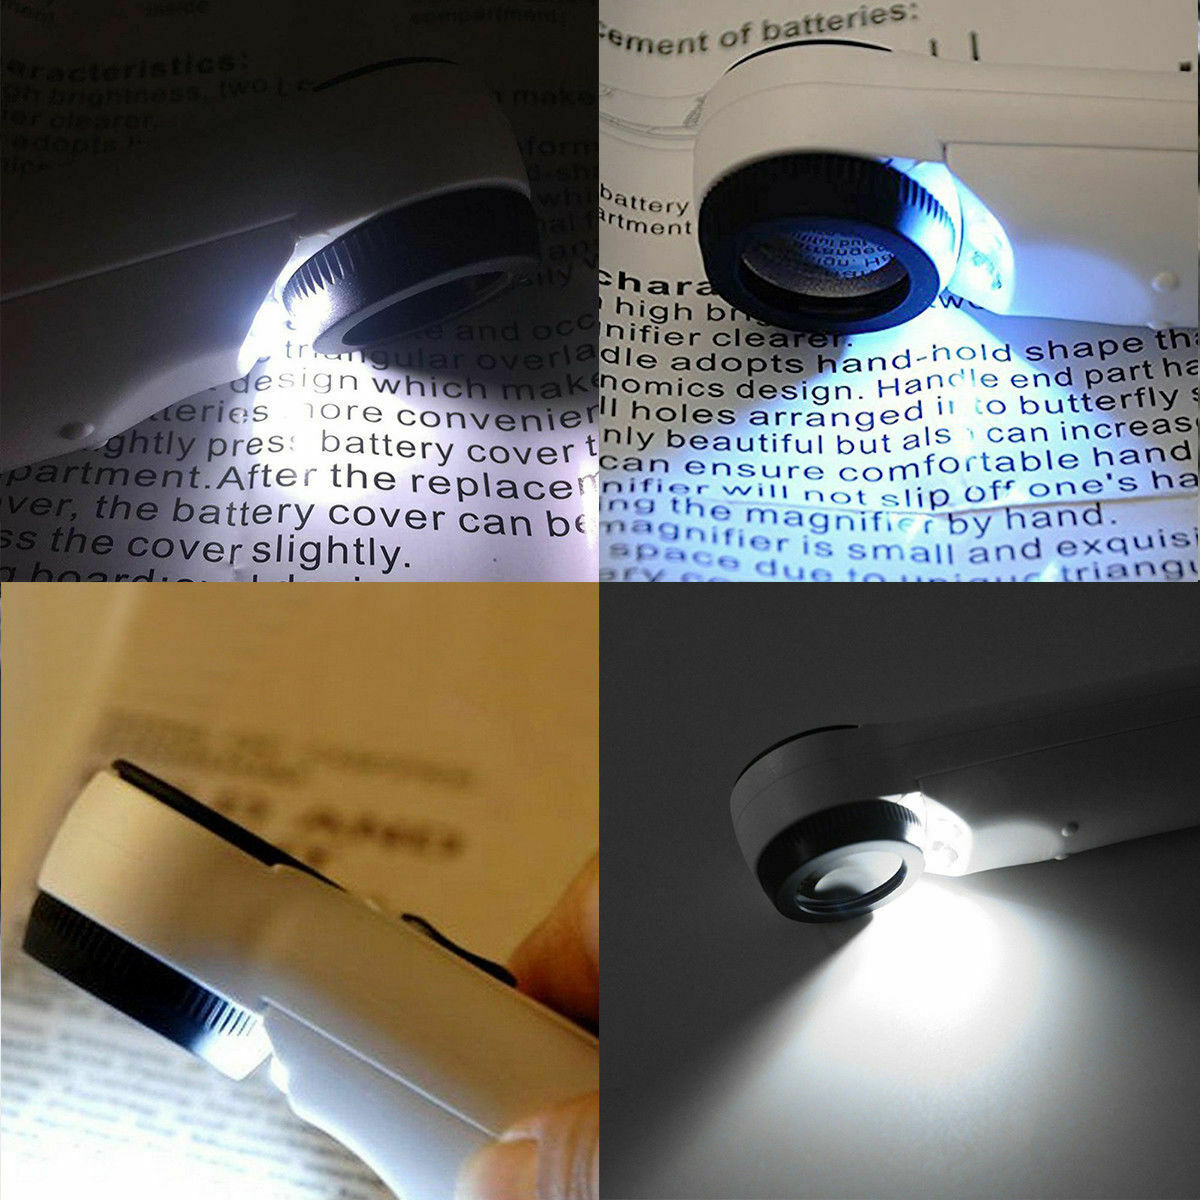 40X Magnifier Magnifying Glass Jeweler Watch Repair Tool Loupe with 2 LED Light